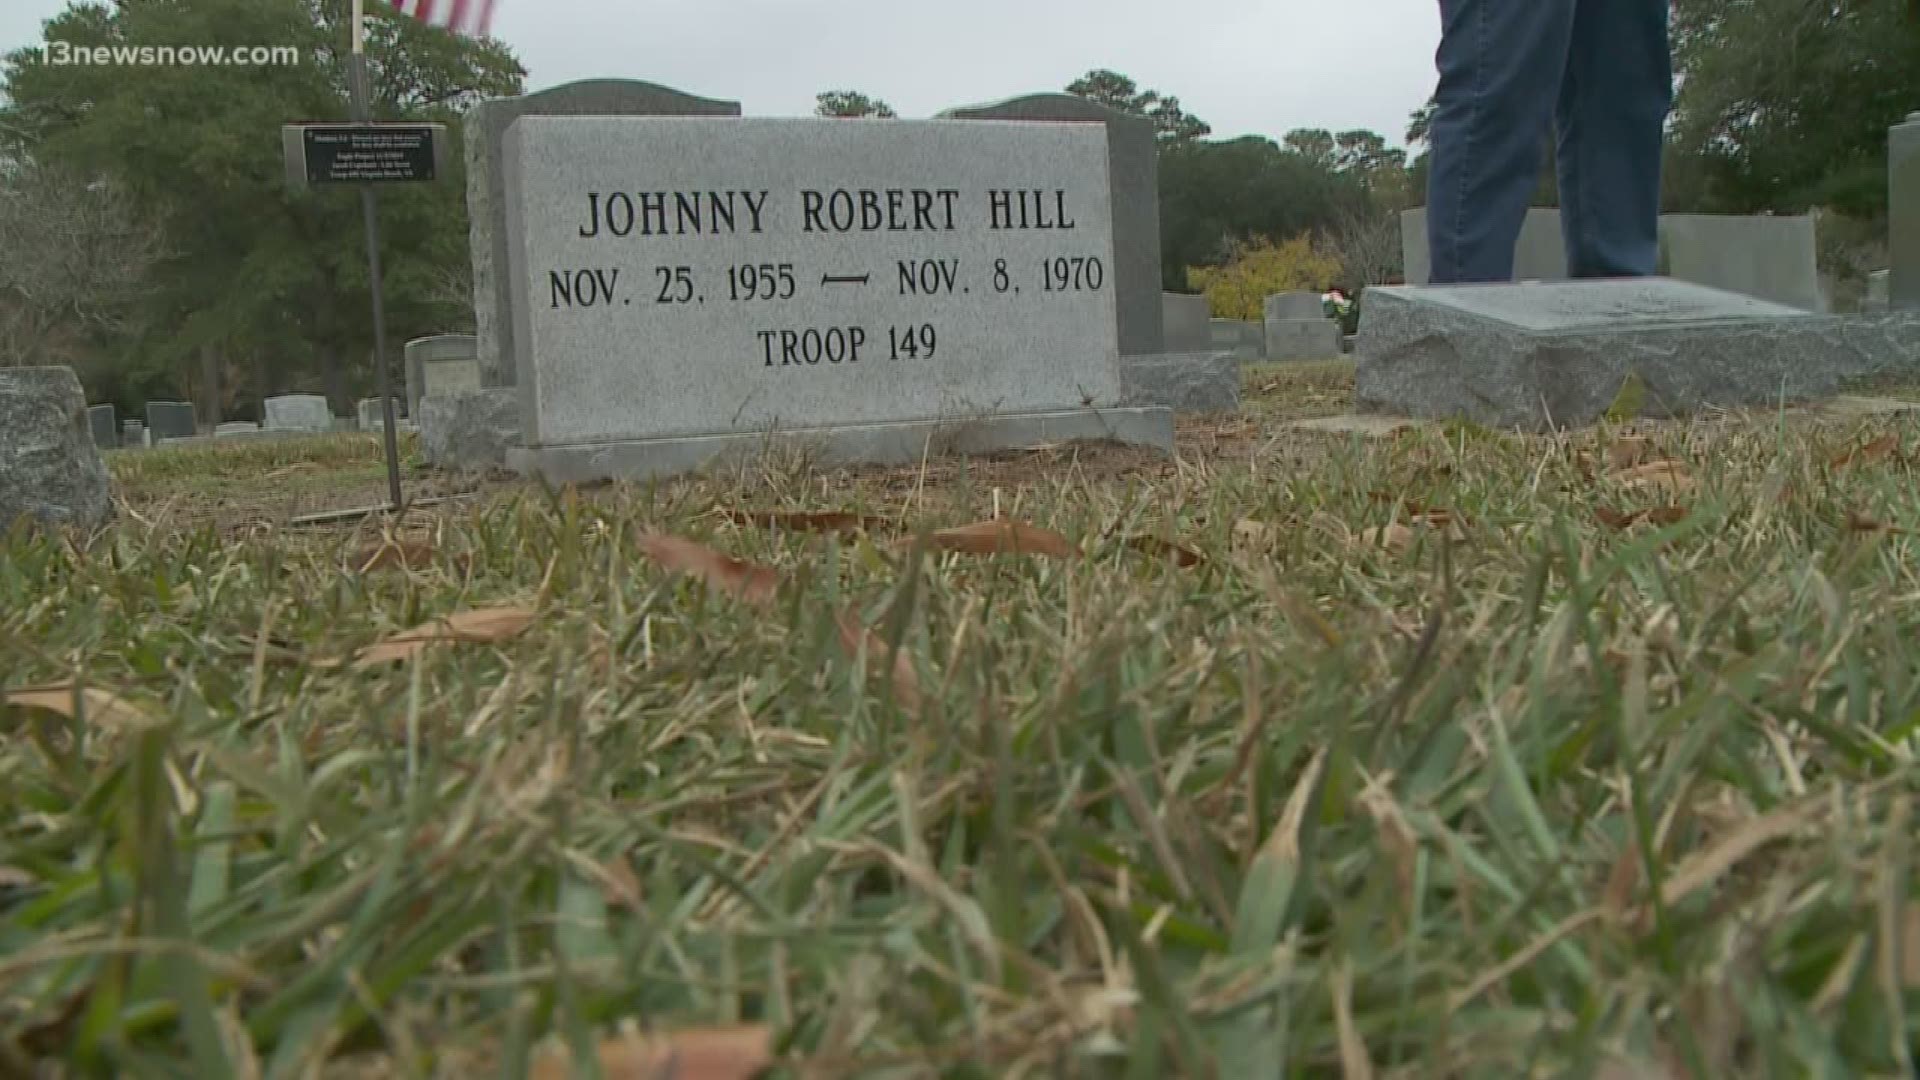 The teen died in November 1970 and never had a grave marker until a local Boy Scout stepped in, as part of his Eagle Scout Service Project.